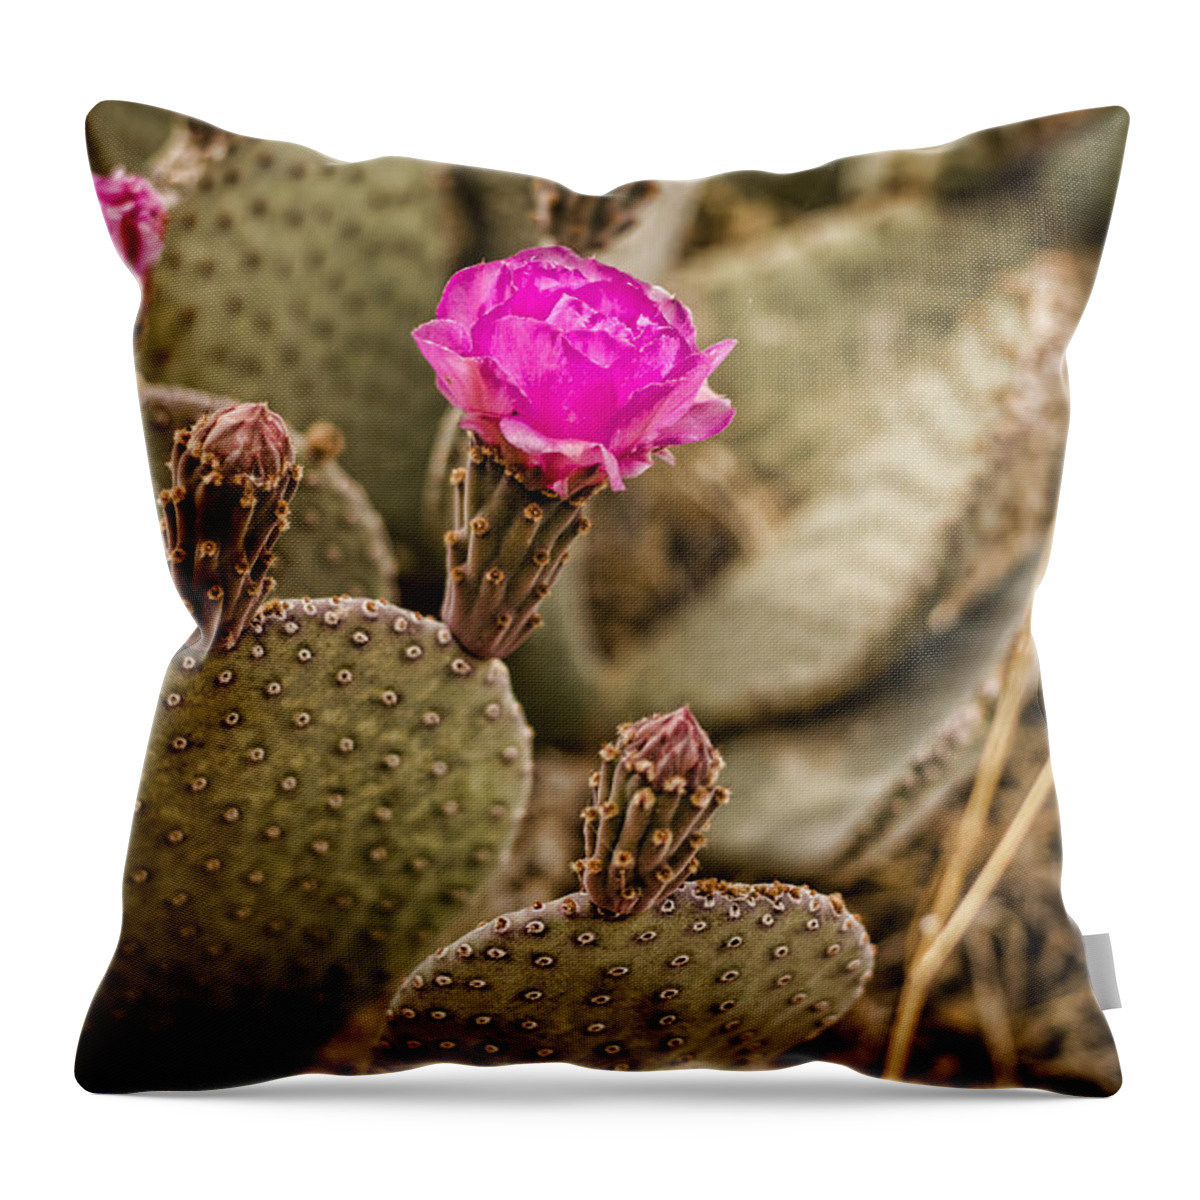 Cactus Throw Pillow featuring the photograph Cactus Flowers by Heather Applegate